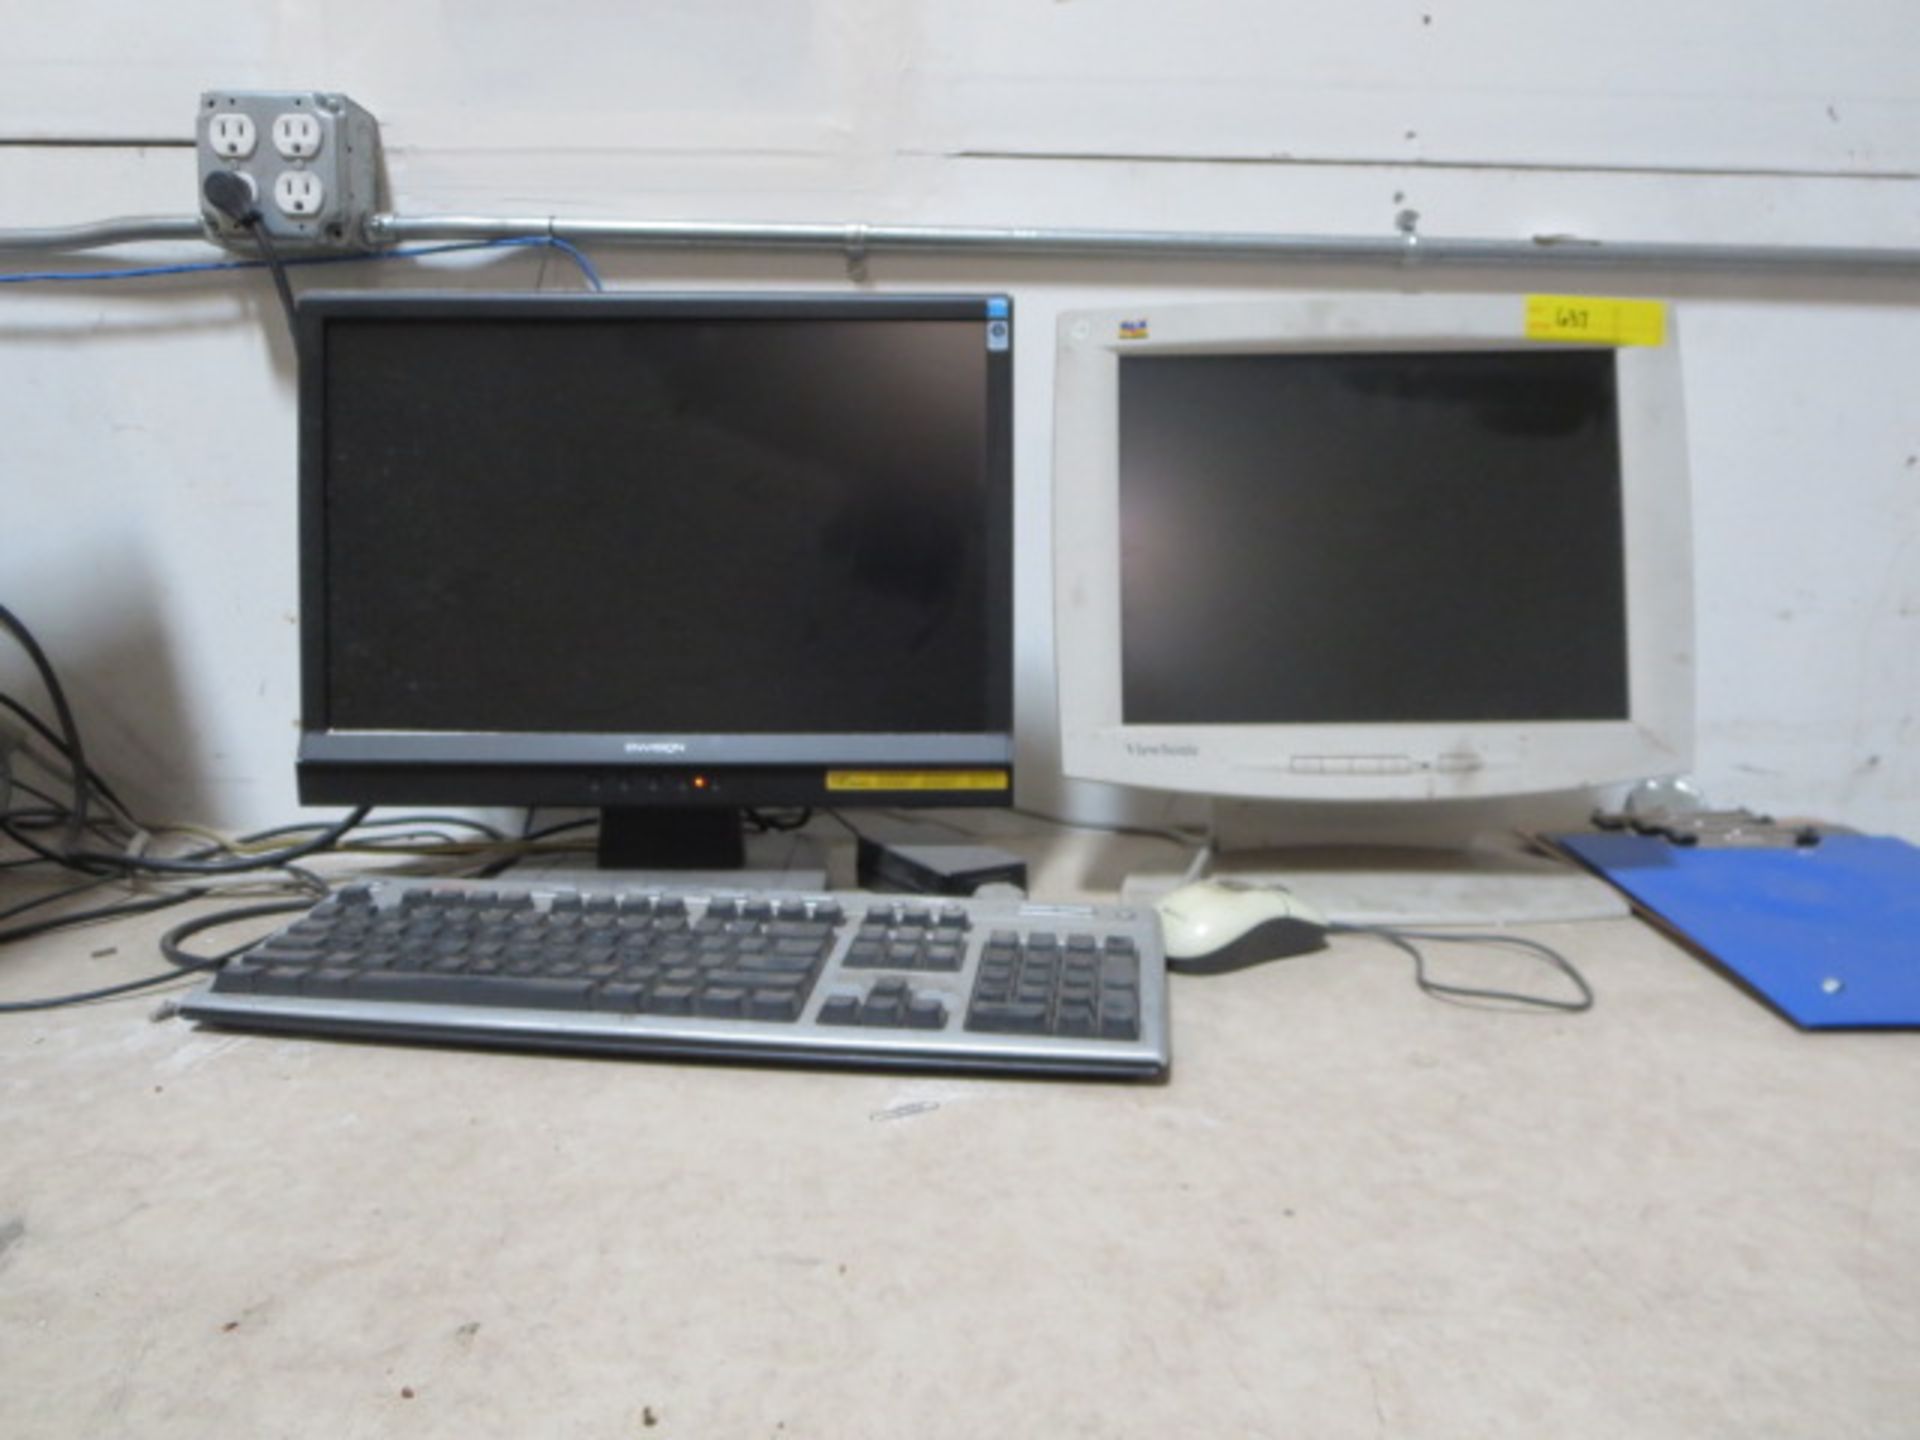 Lot of LCD Monitors, Keyboard and Mouse